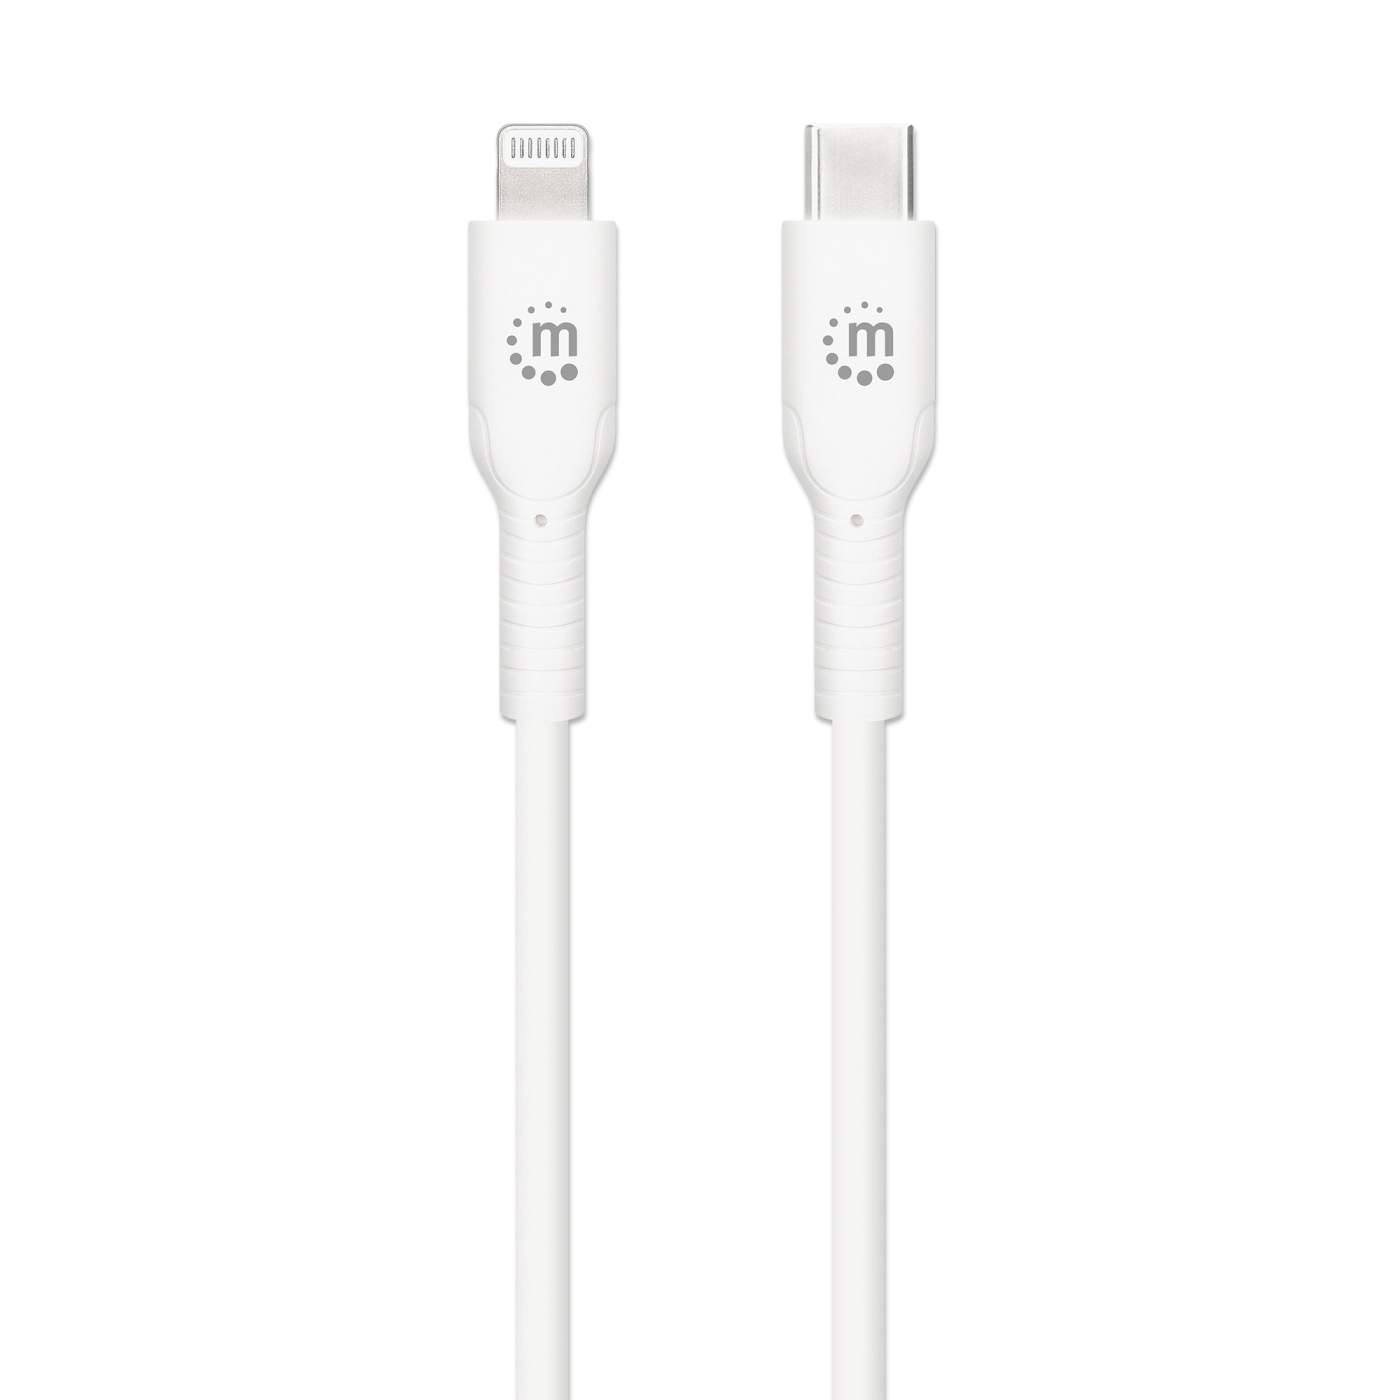 Buy Reconnect RALCE1002 USB-C to Lightning Cable (Black/White